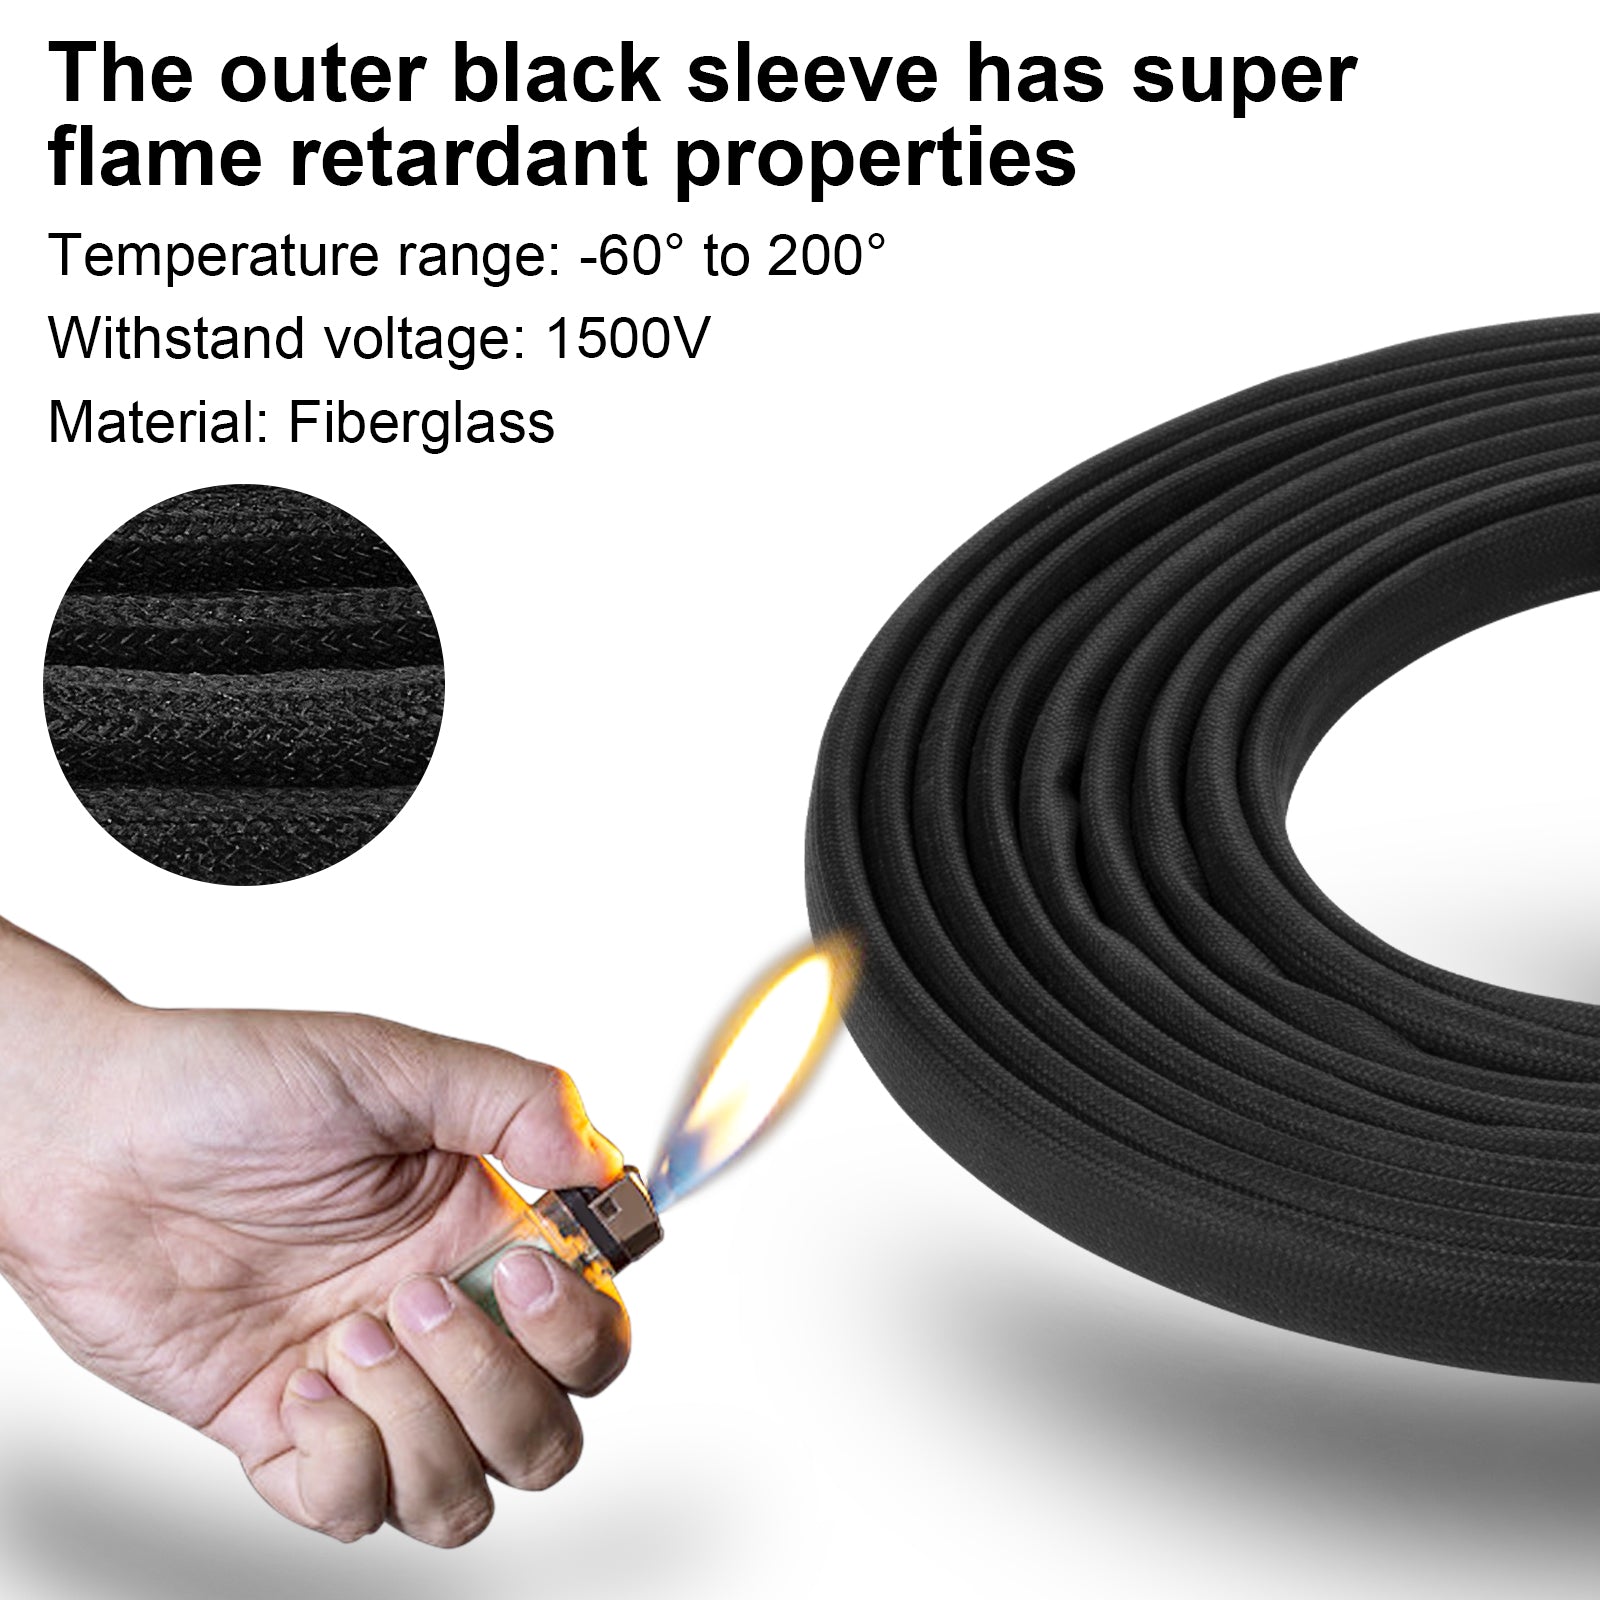 Shirbly Battery Cables - 10FT 8AWG(10mm²) Battery Power Inverter Cables  with 5/16'' Lugs, Tinned Copper PV Wire for Solar Panle Automotive  Motorcycle